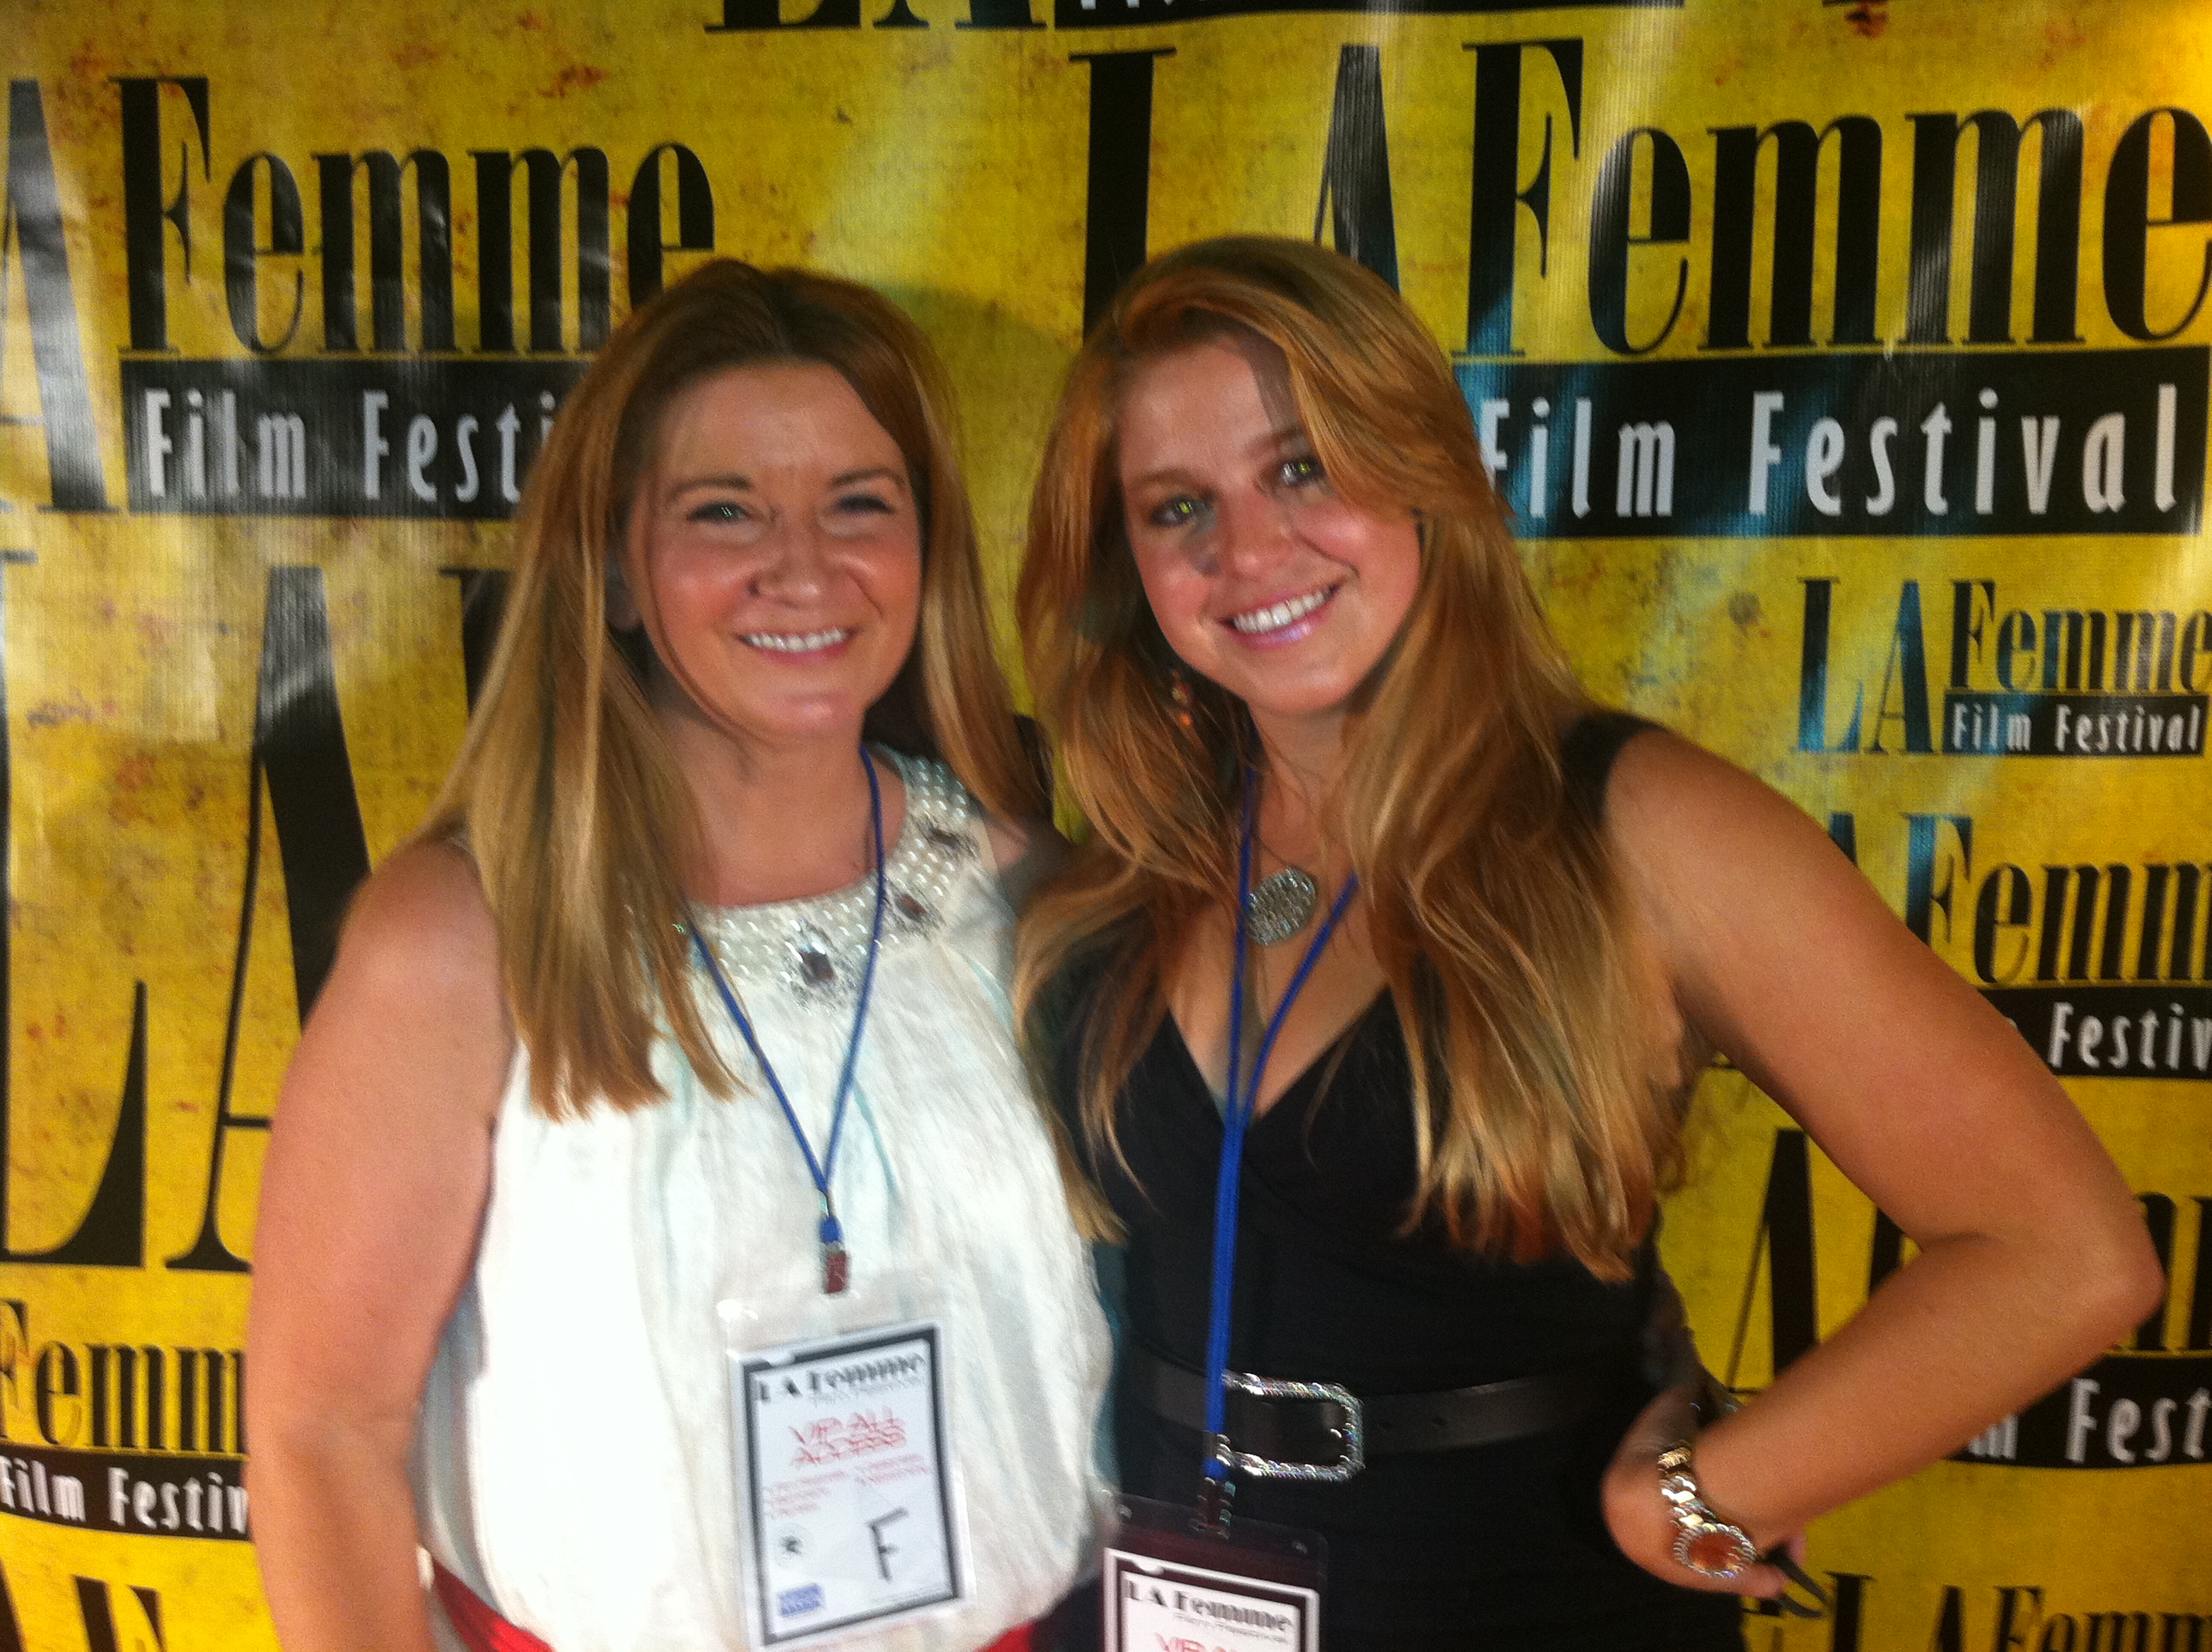 Producer/Actress Peggy Lane and Writer Nicole Wagner at the LA Femme Festival